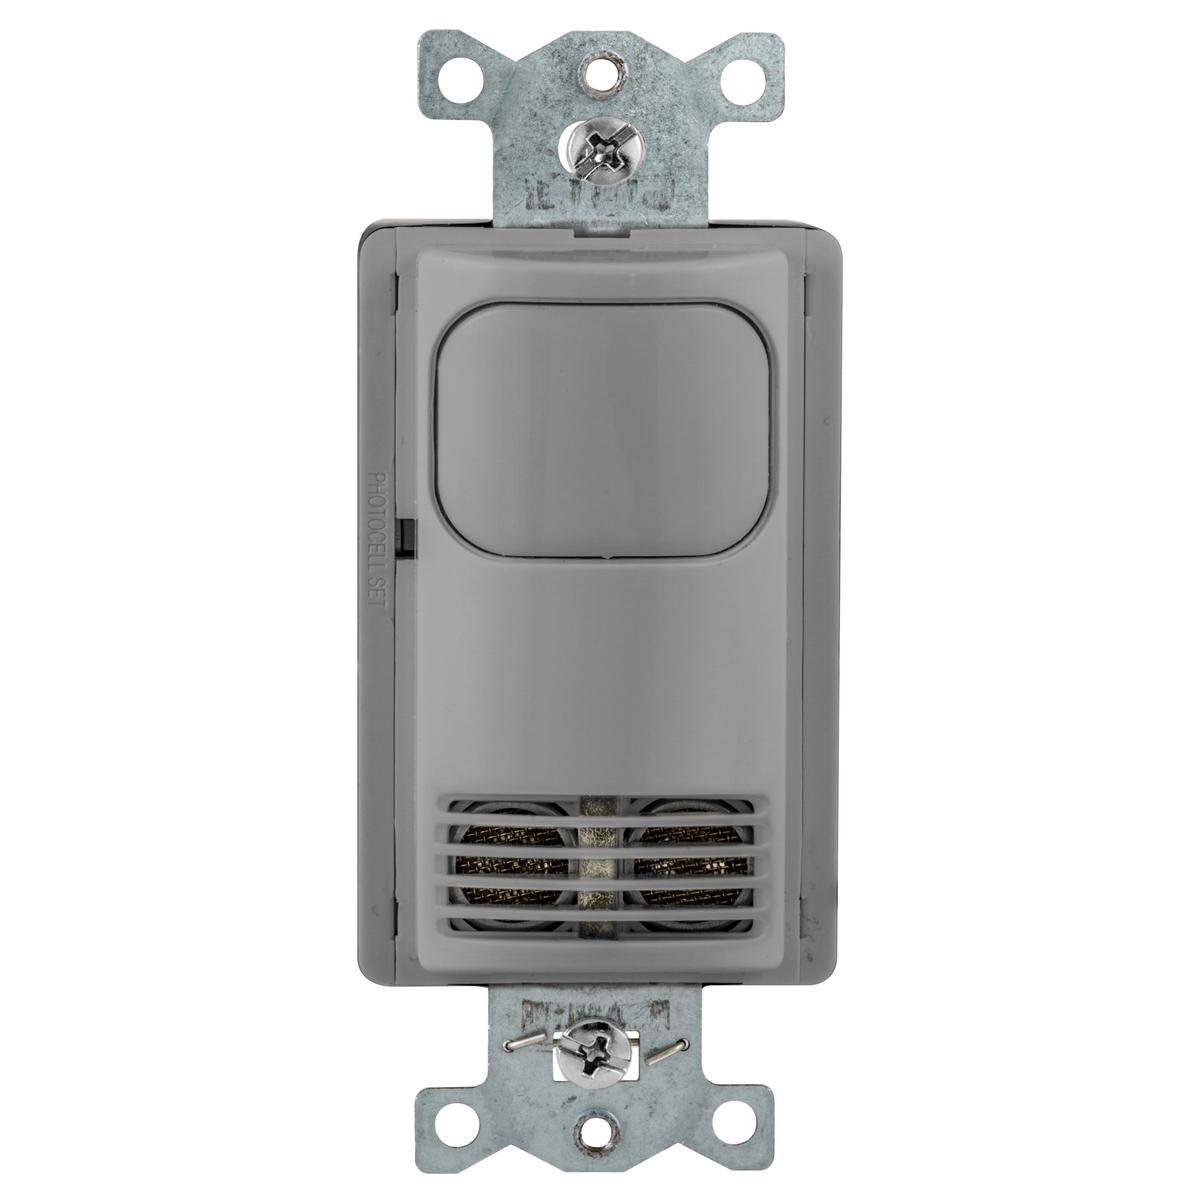 Hubbell AD2000GY1N Occupancy Sensing Products, Wall Switch,Occupancy or Vacancy, Dual Tech, 1 Relay, 1000 Square Feet, 800WIncandescent, 1000W Fluorescent @ 120V AC, 1800W Fluorescent @ 277V AC,120/277V AC, With Photocell, Gray, No Buttons 